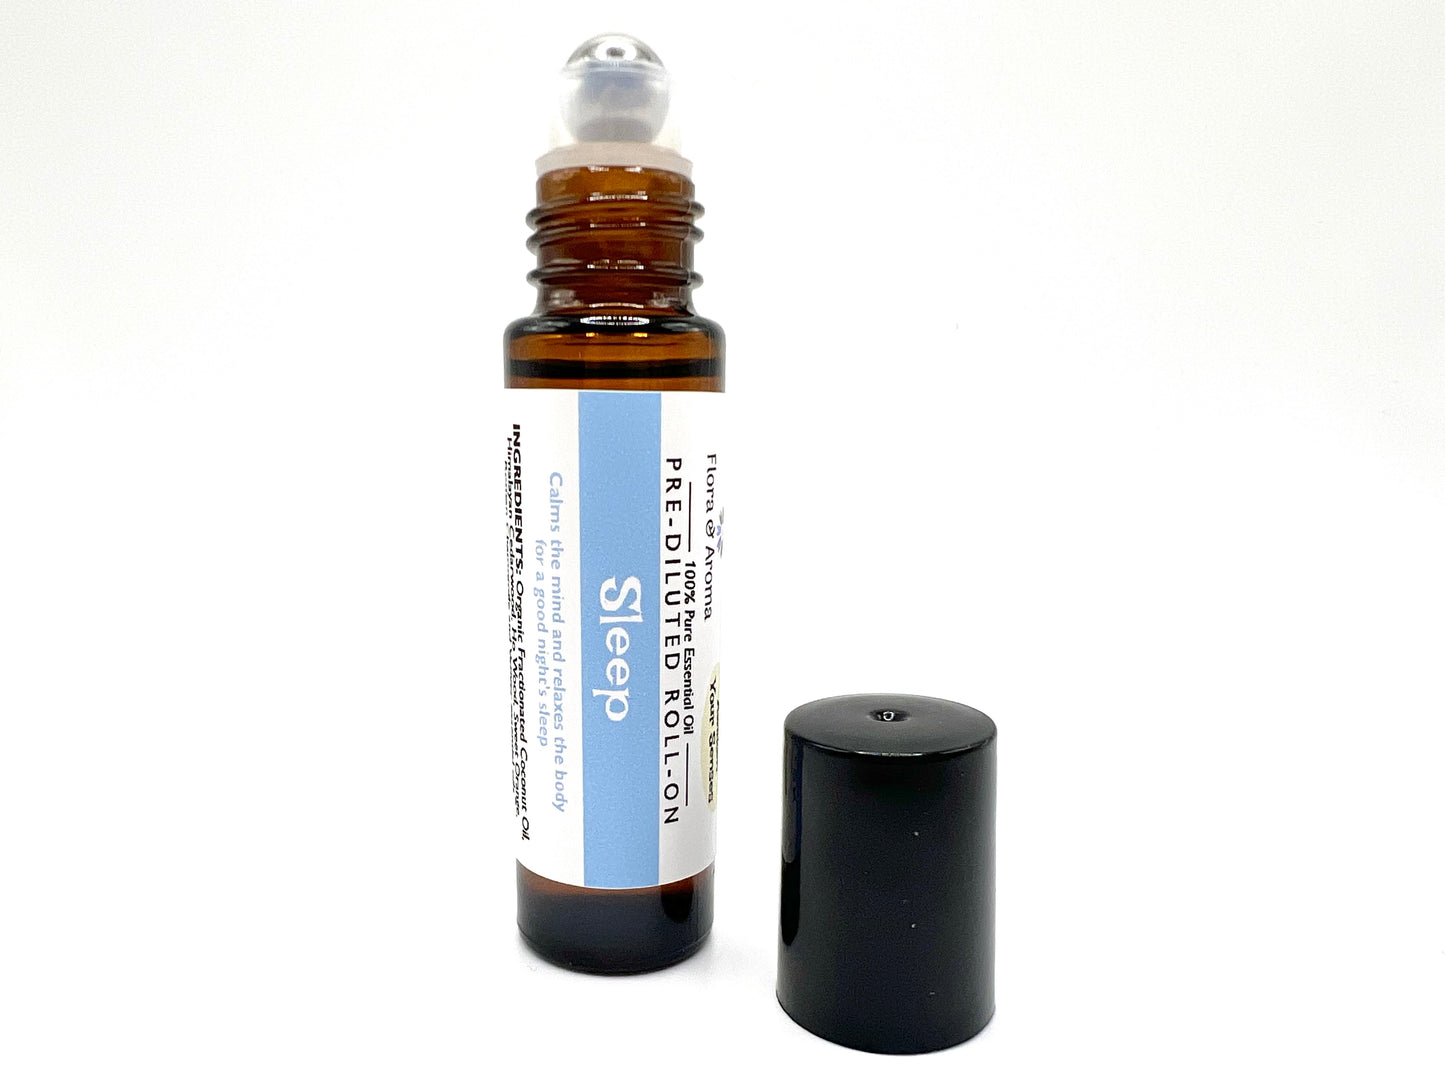 Sleep Essential Oil Pre-Diluted Roll-On